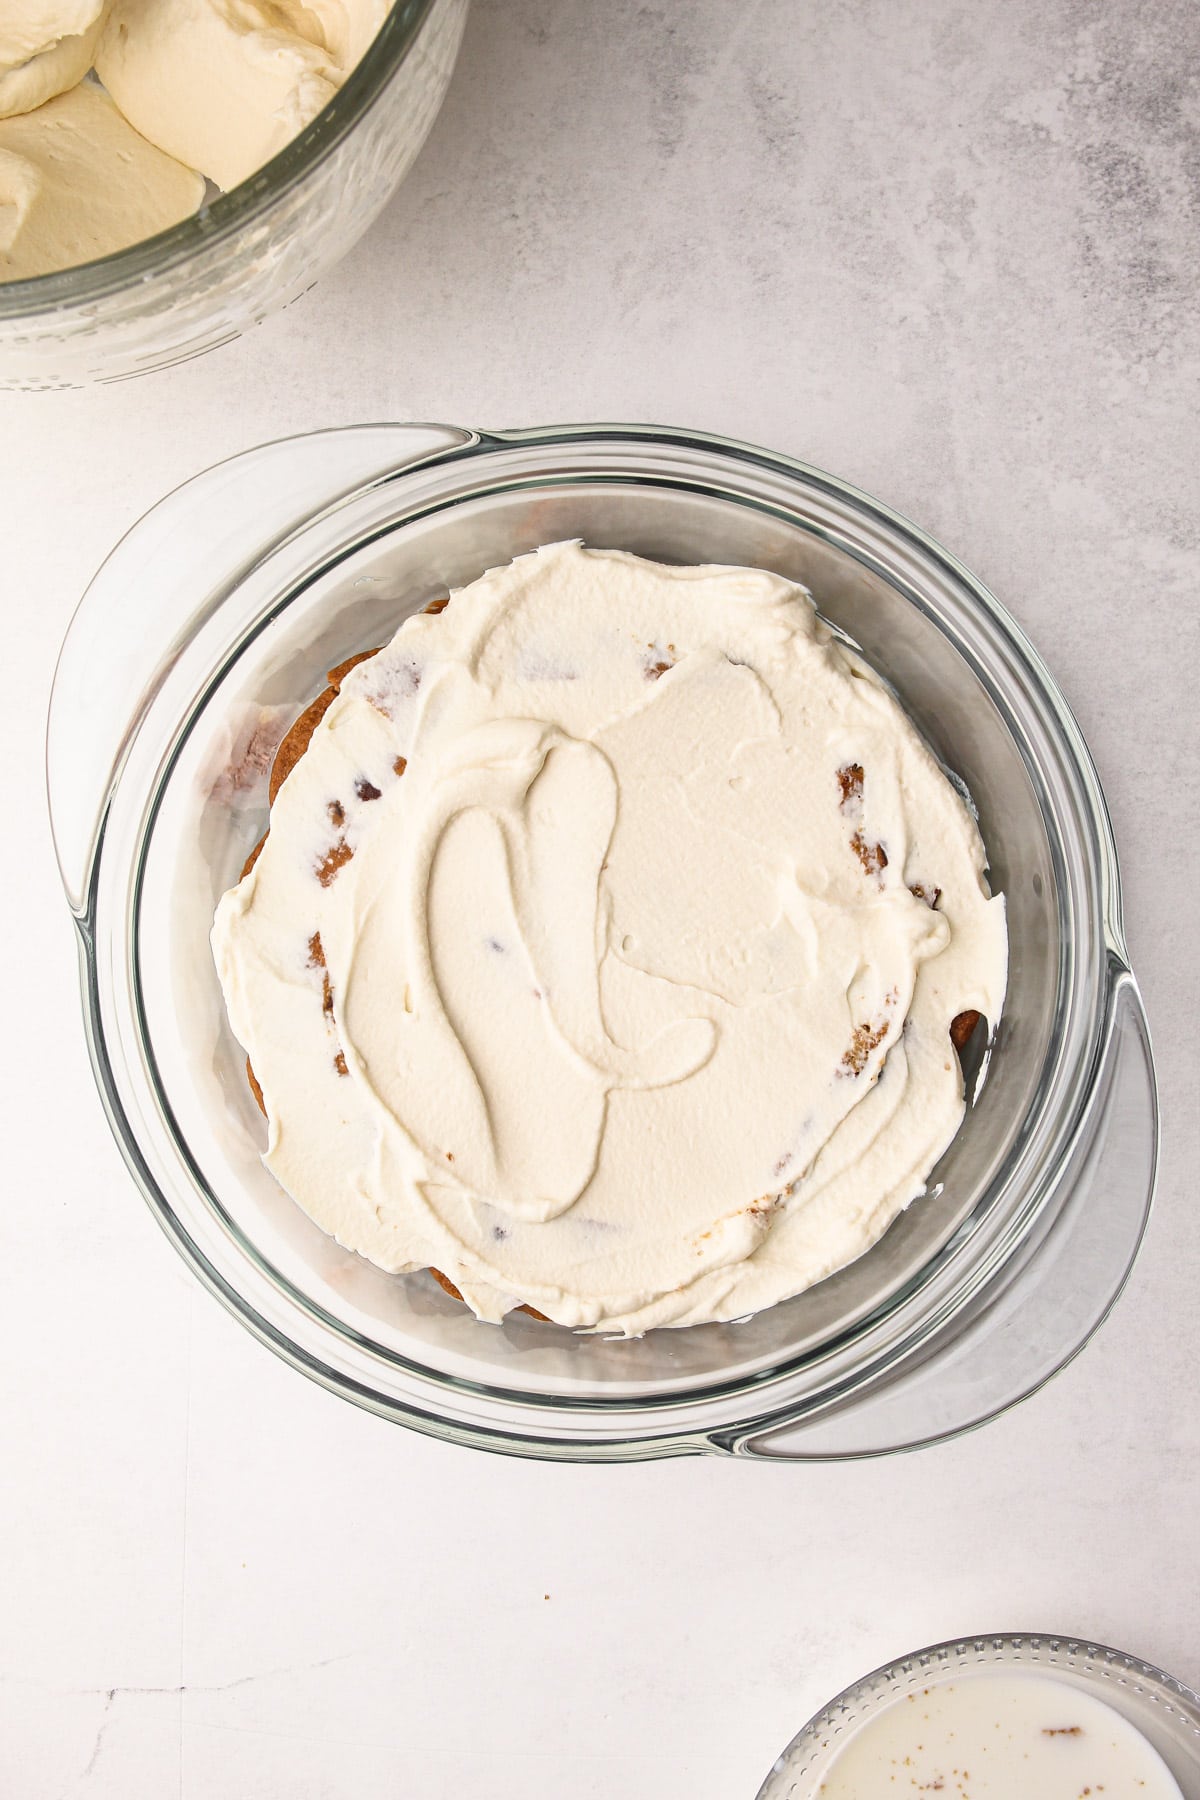 The second cream layer to a milk and cookie icebox cake.